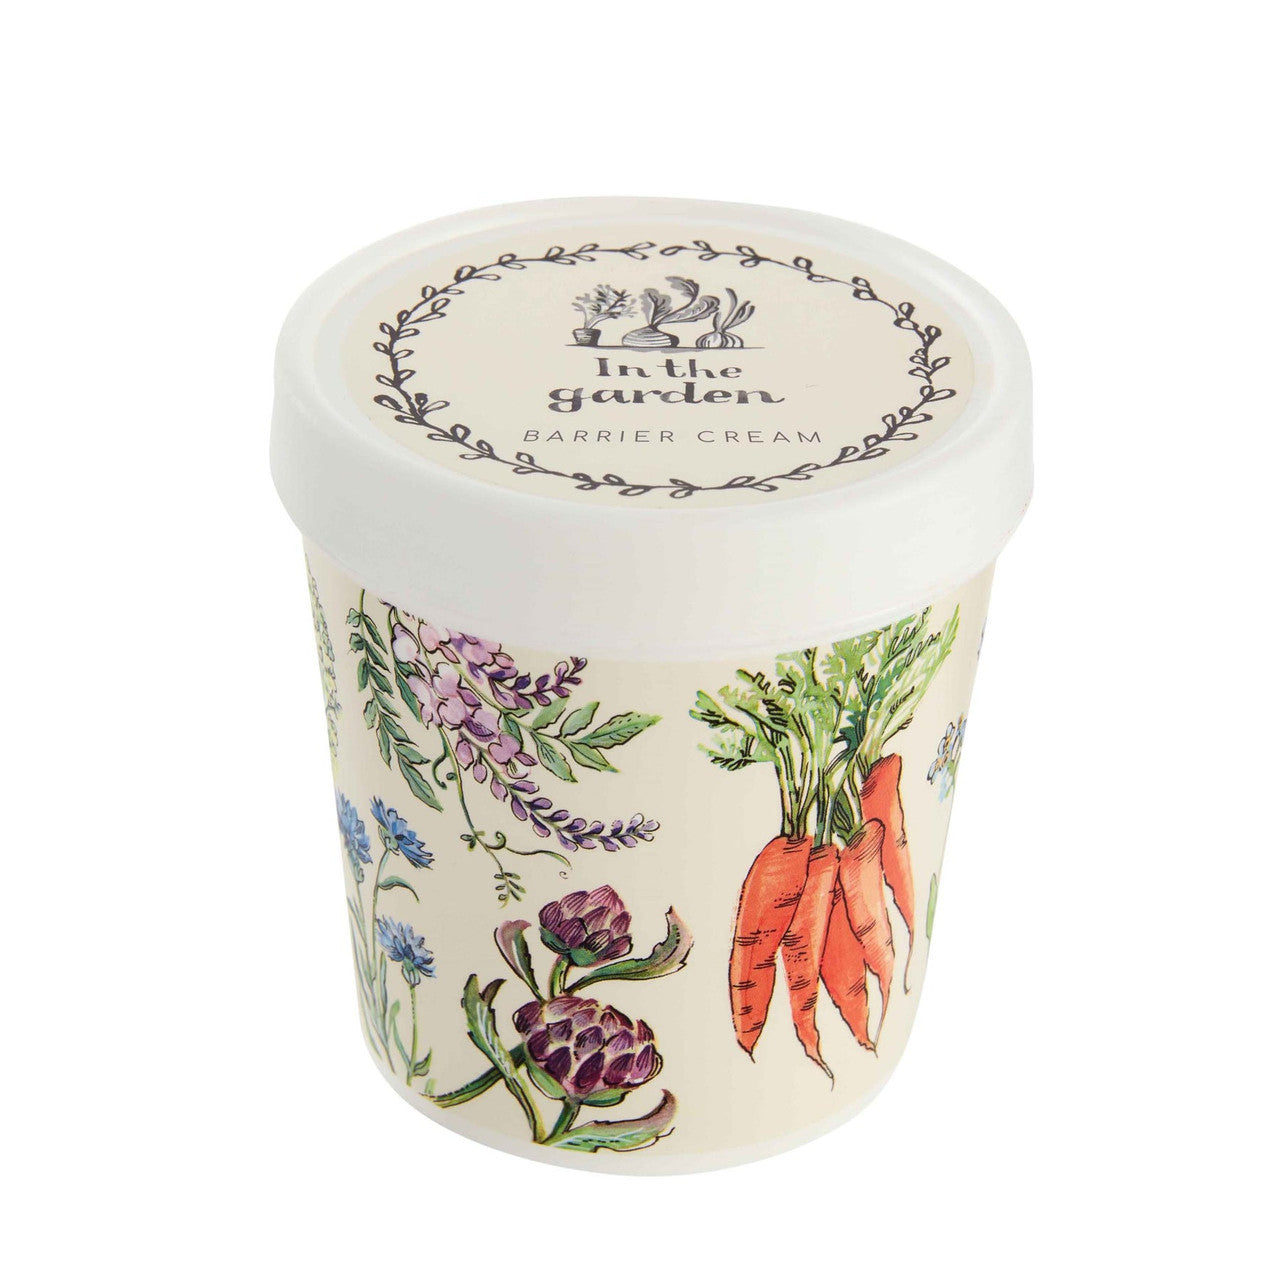 In The Garden Barrier Cream by Heathcote and Ivory.